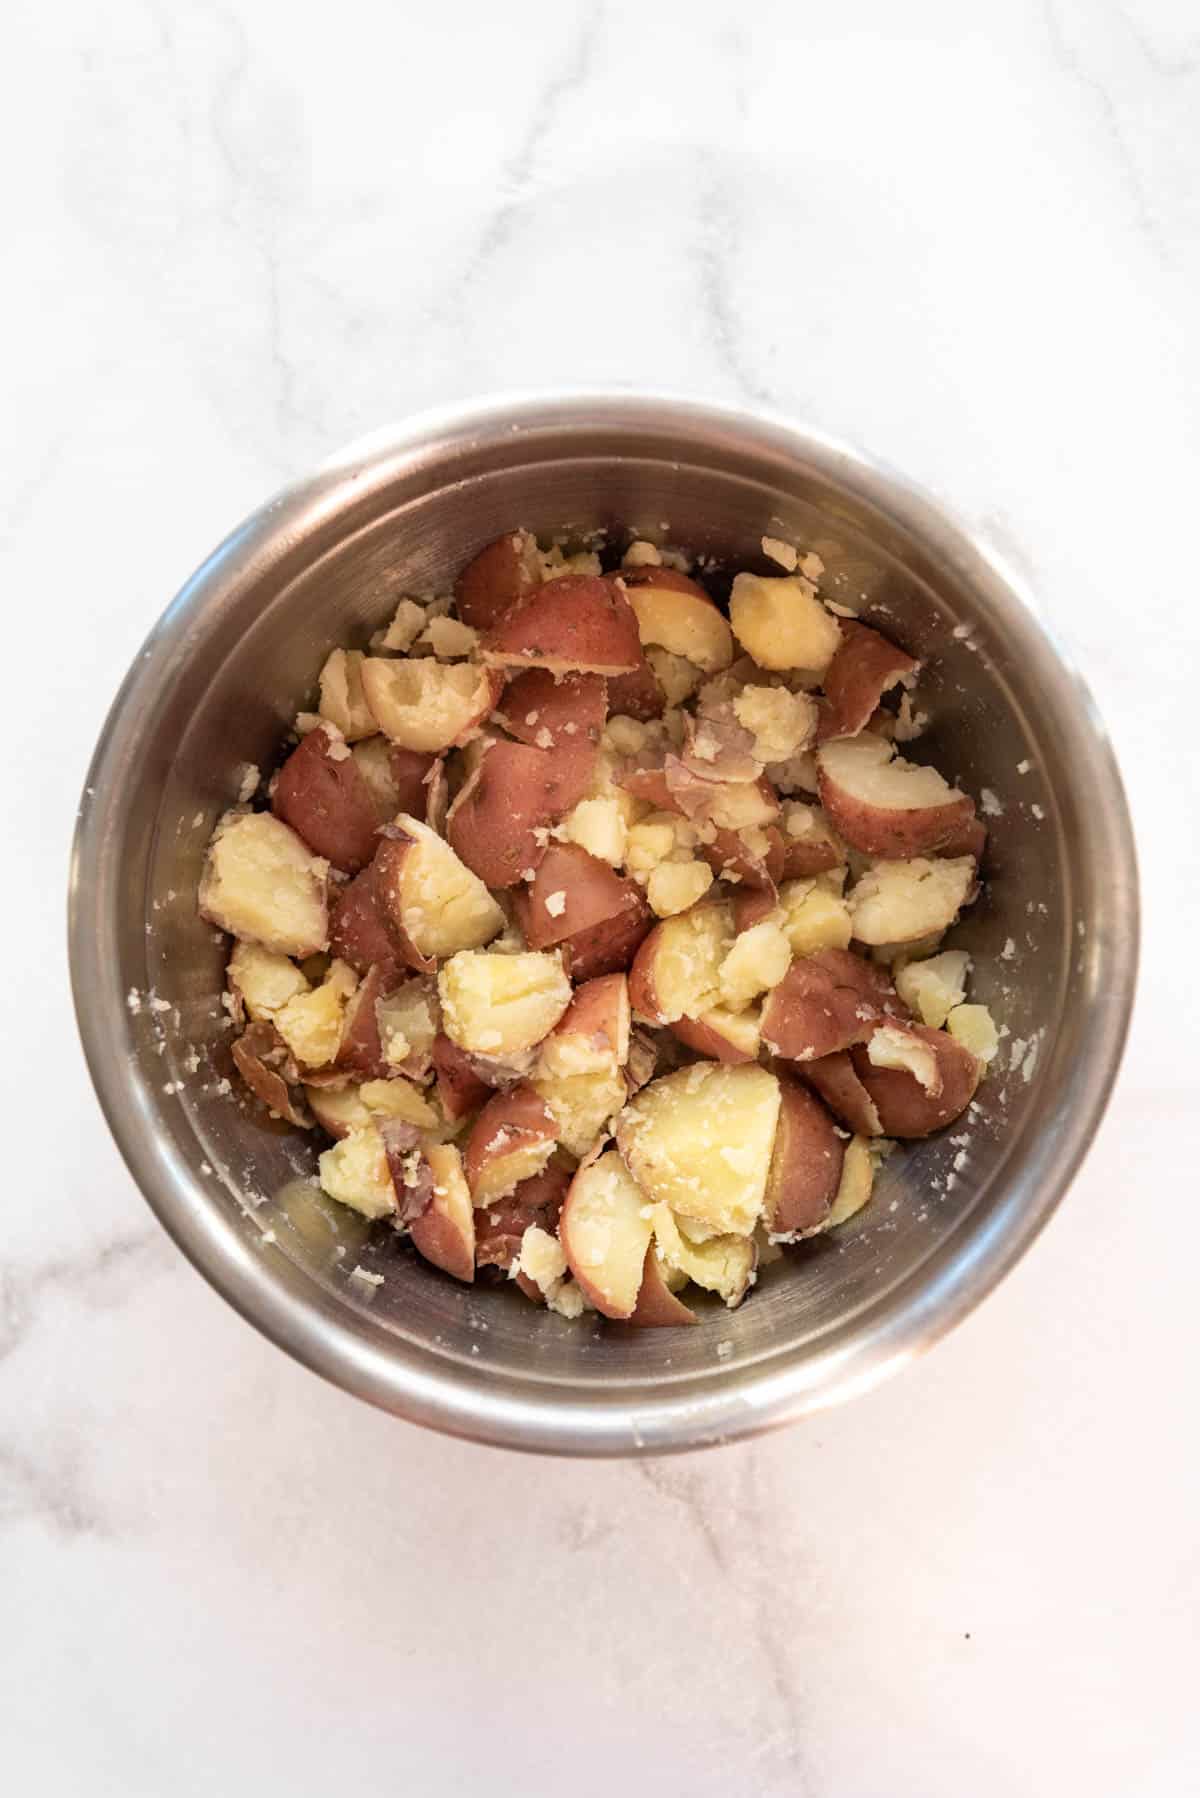 Cooked red potatoes with skins on in a large mixing bowl.